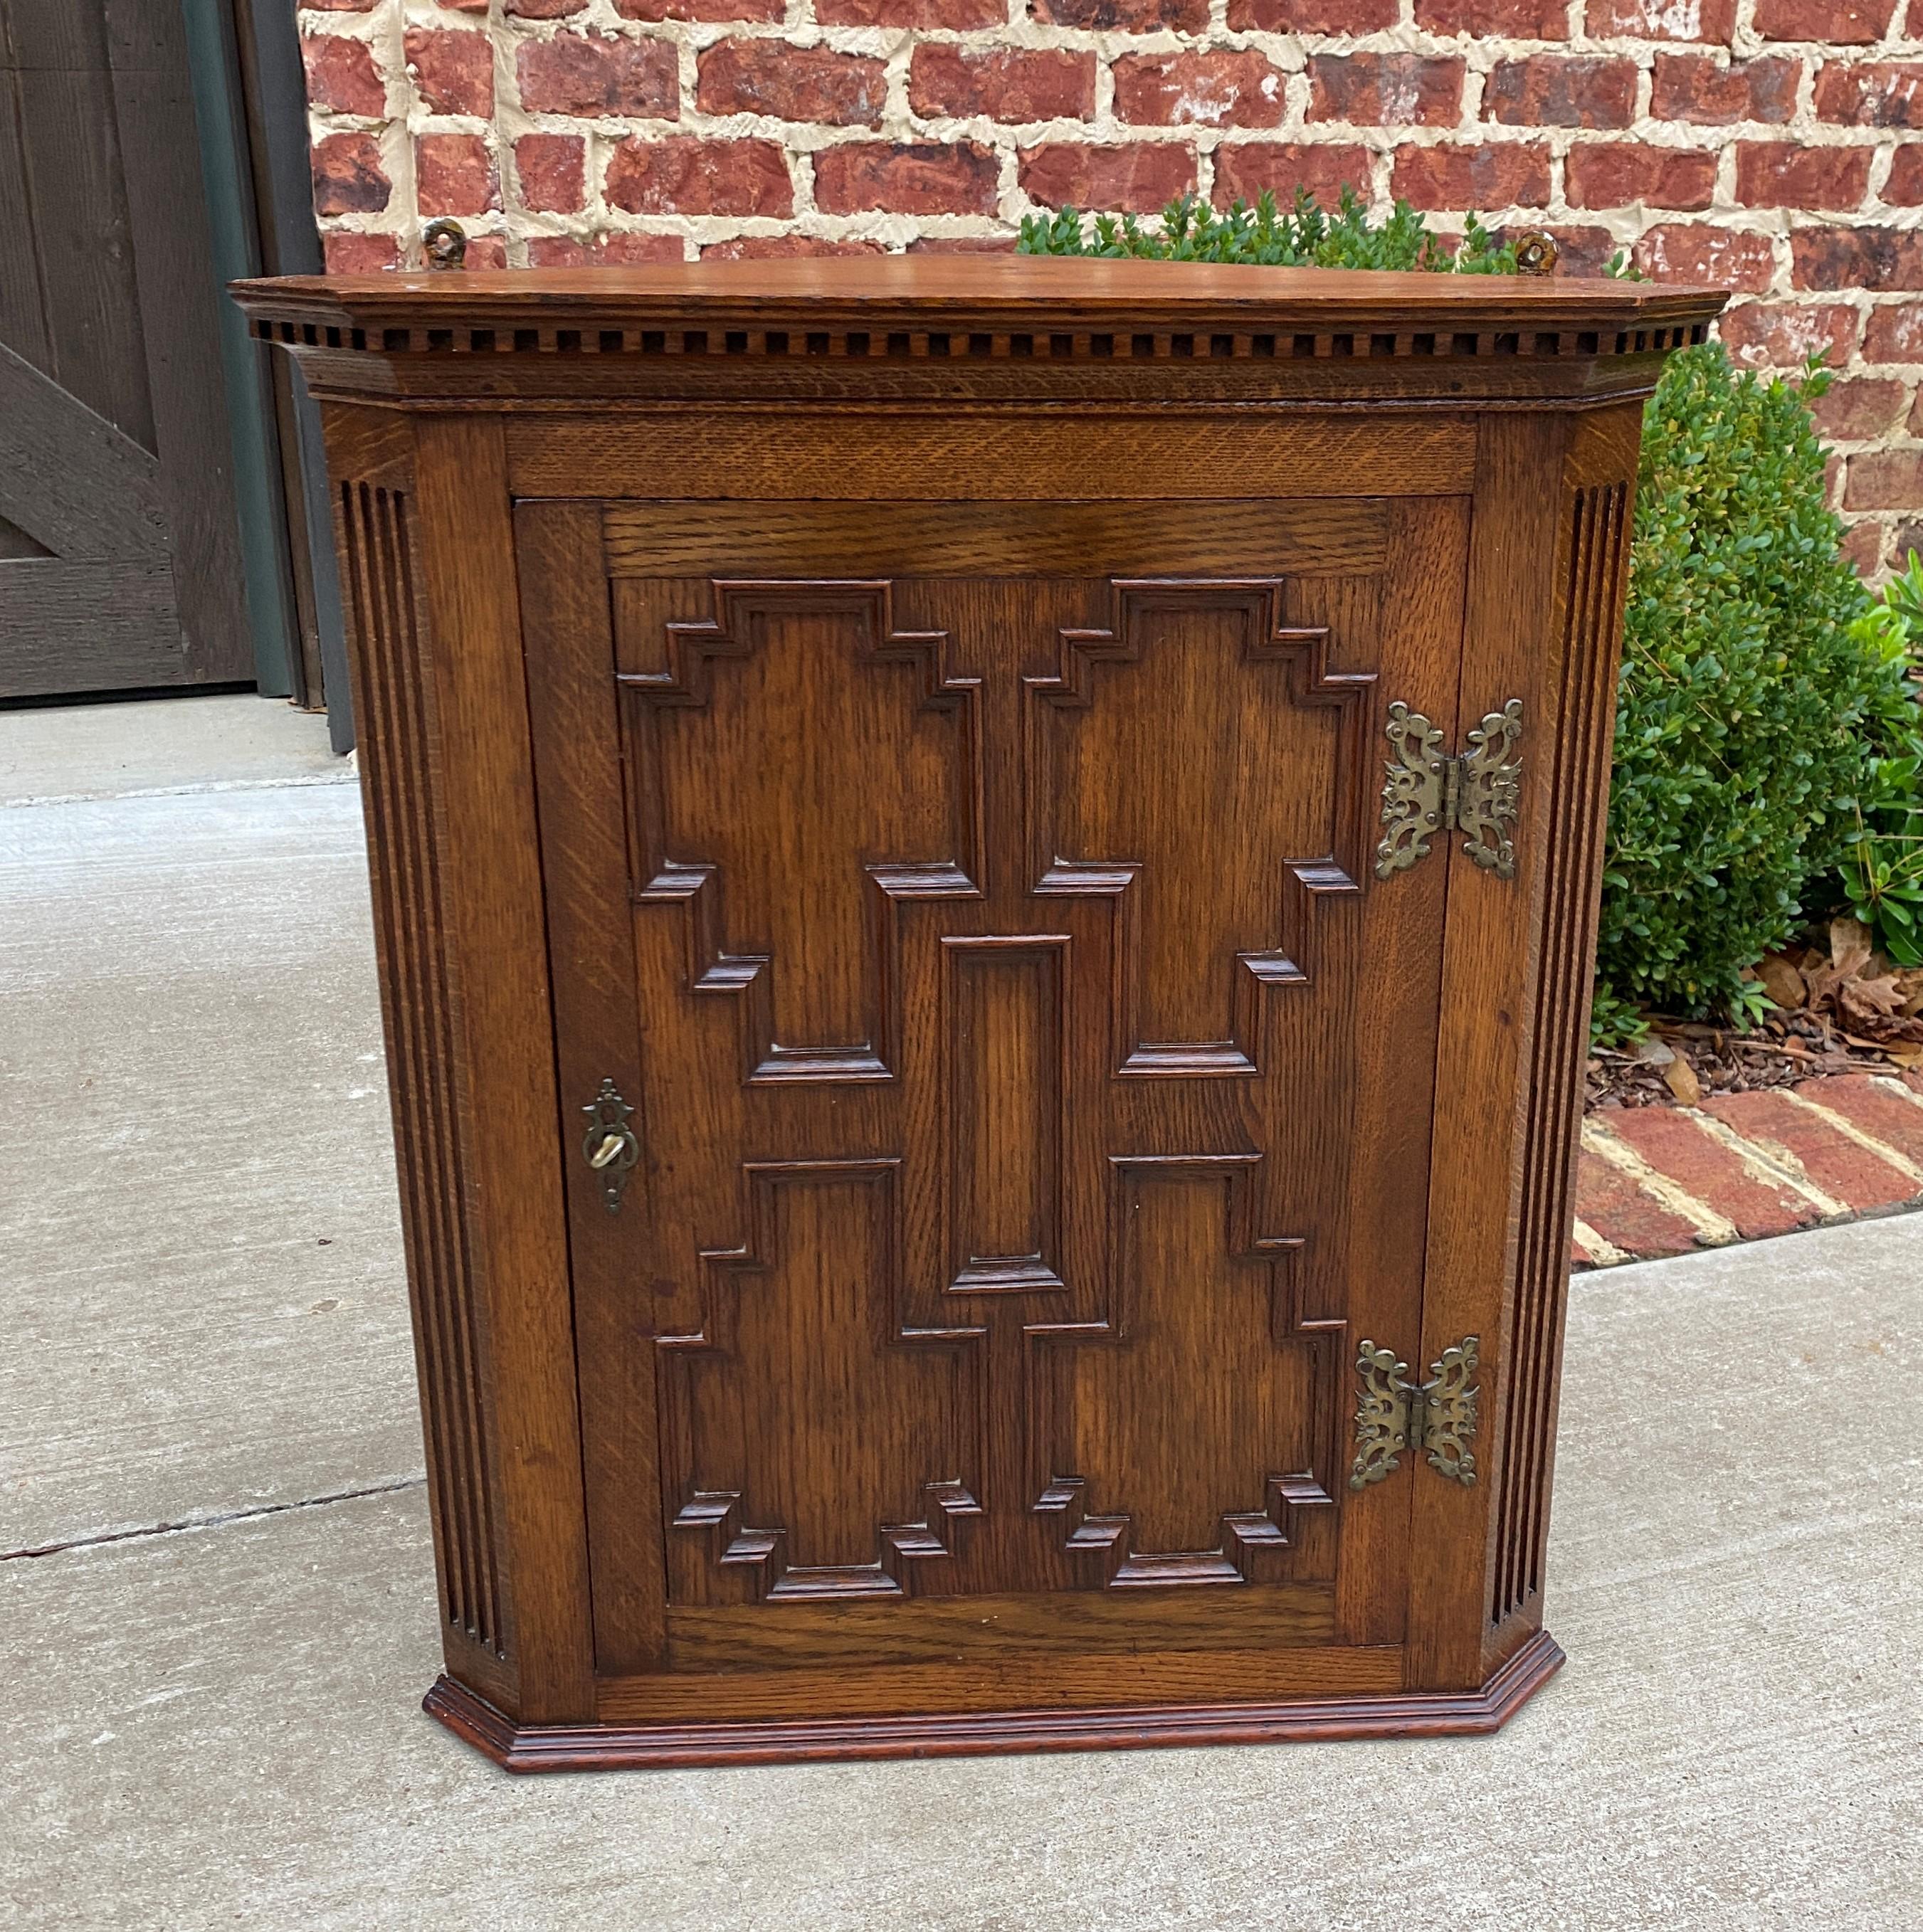 Beautifully carved antique English oak hanging wall or freestanding corner cabinet, medicine or spice cabinet with interior shelves~~Jacobean Style~~c. 1920s

Full of classic English charm~~beautifully carved oak wall or freestanding cabinet with